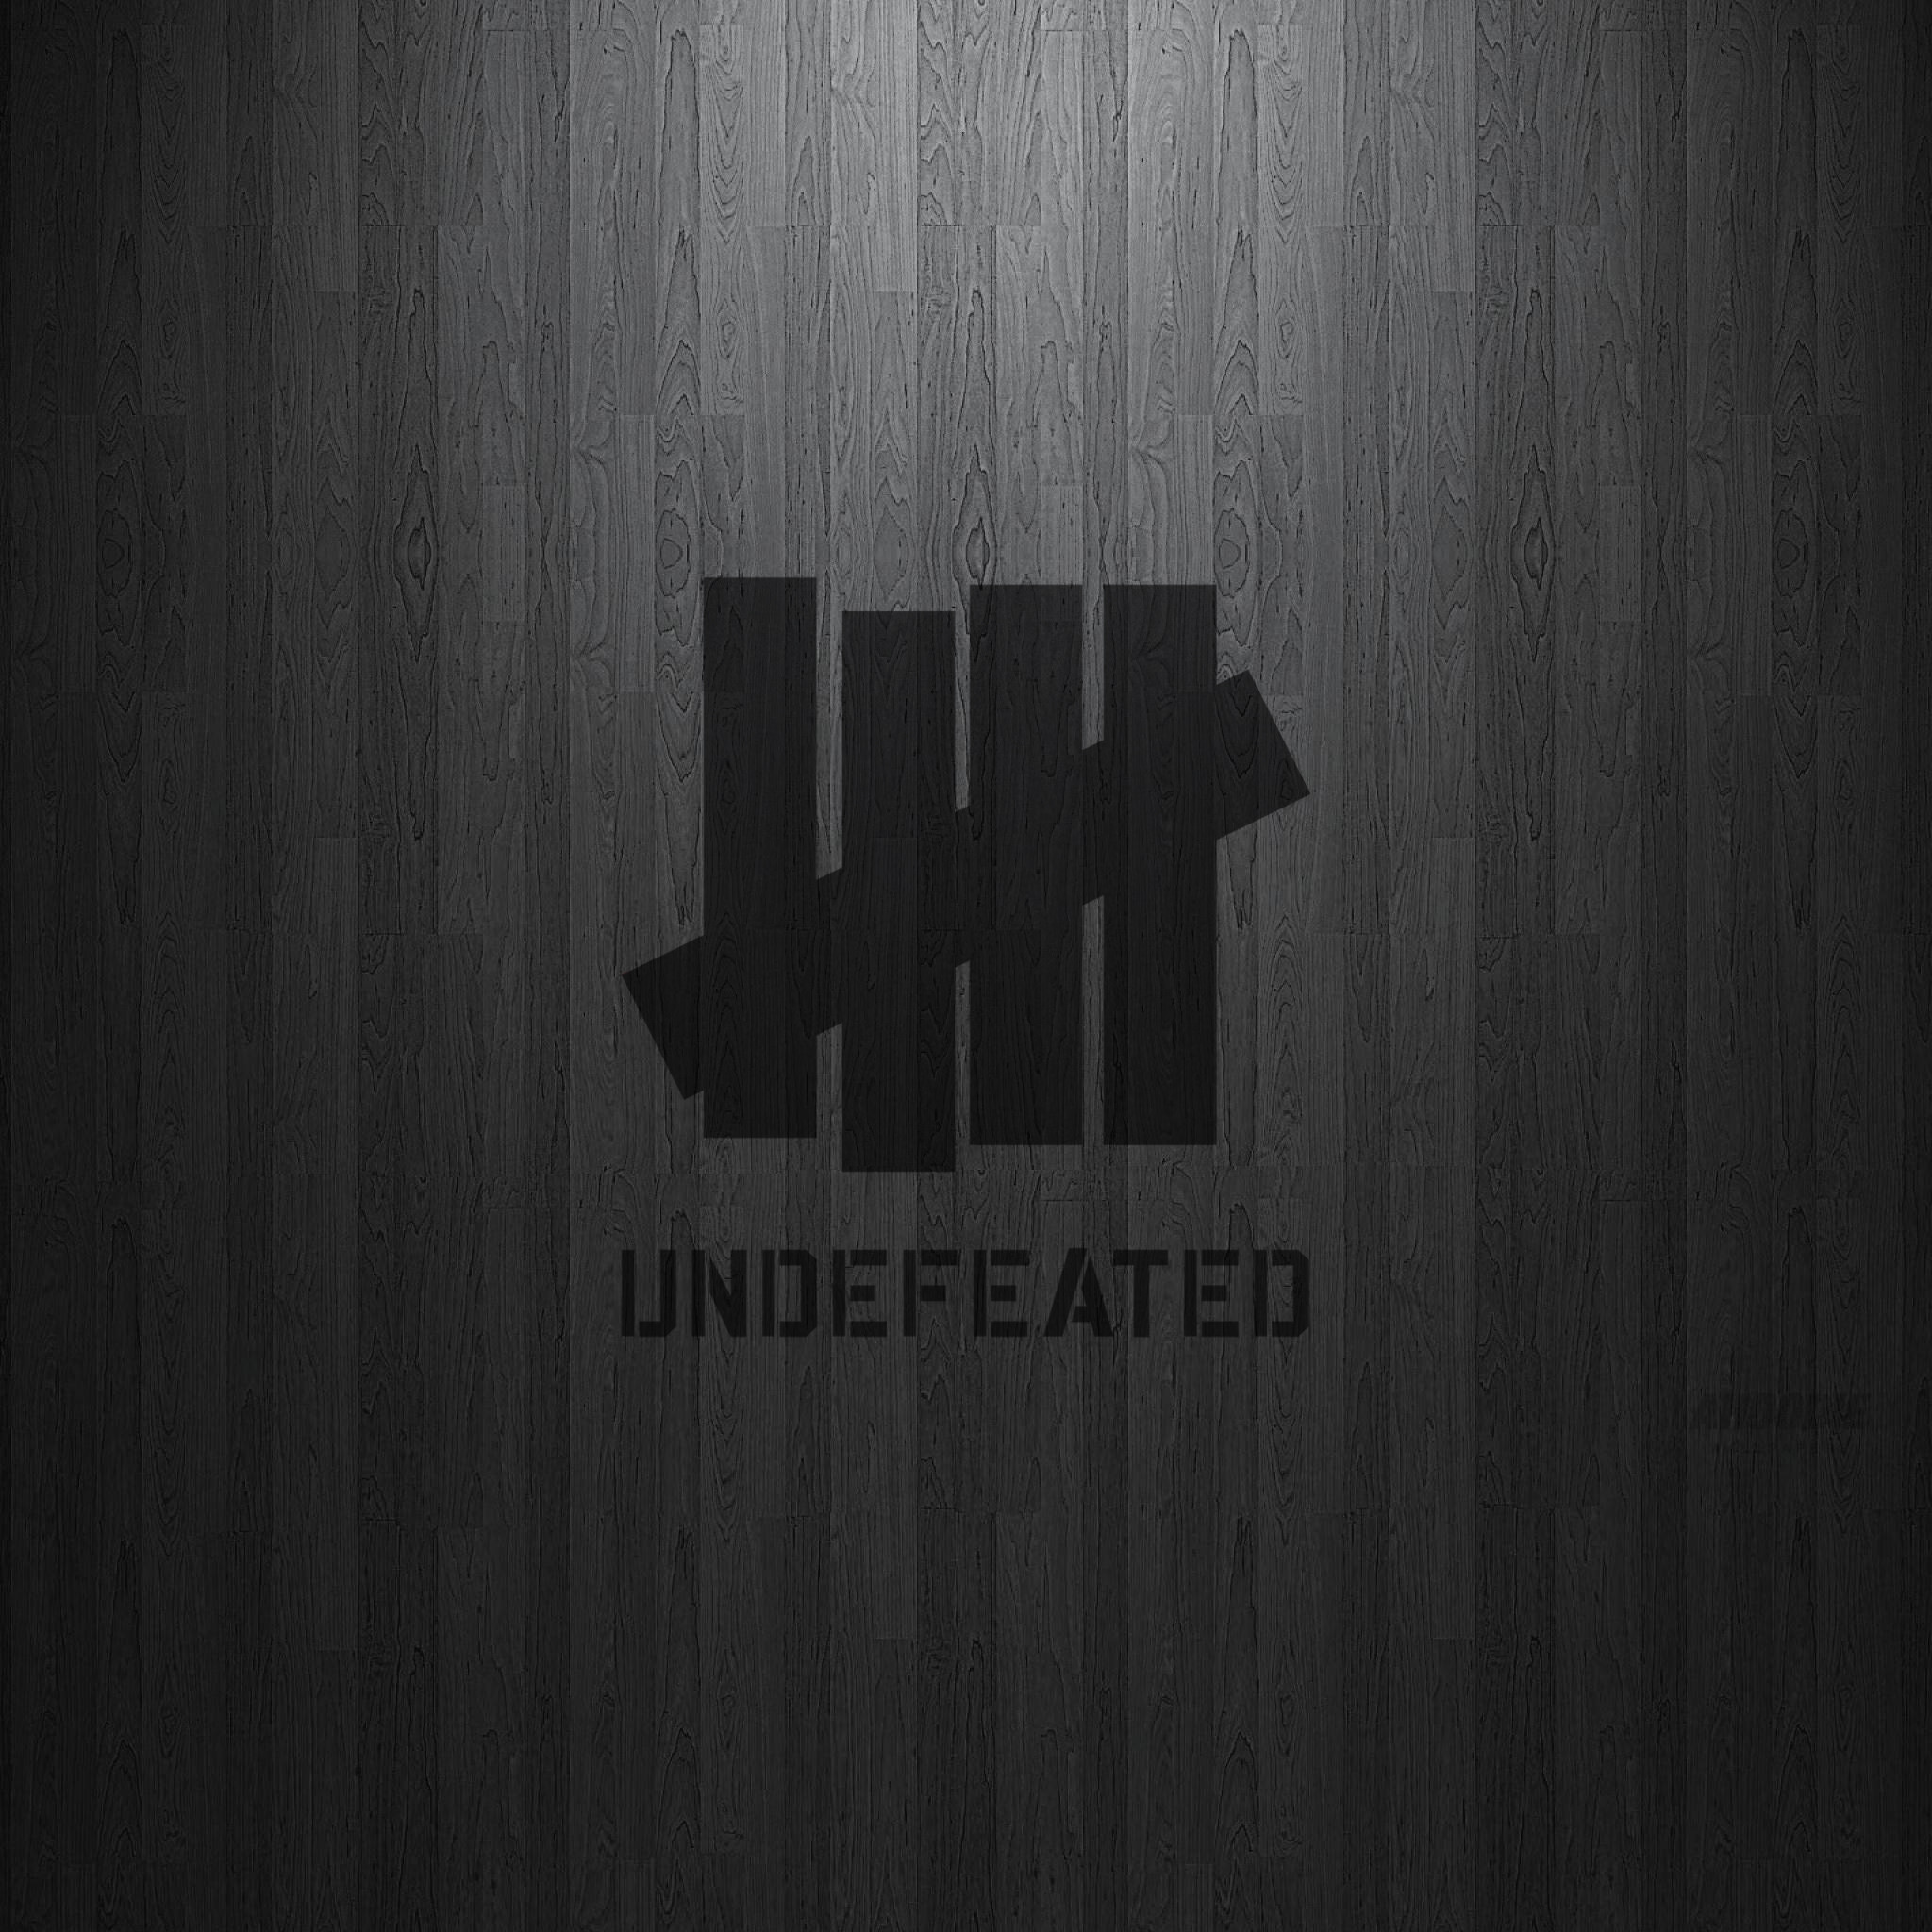 2048x2048 Undefeated Wallpaper Related Keywords & Suggestions - Undefeated .